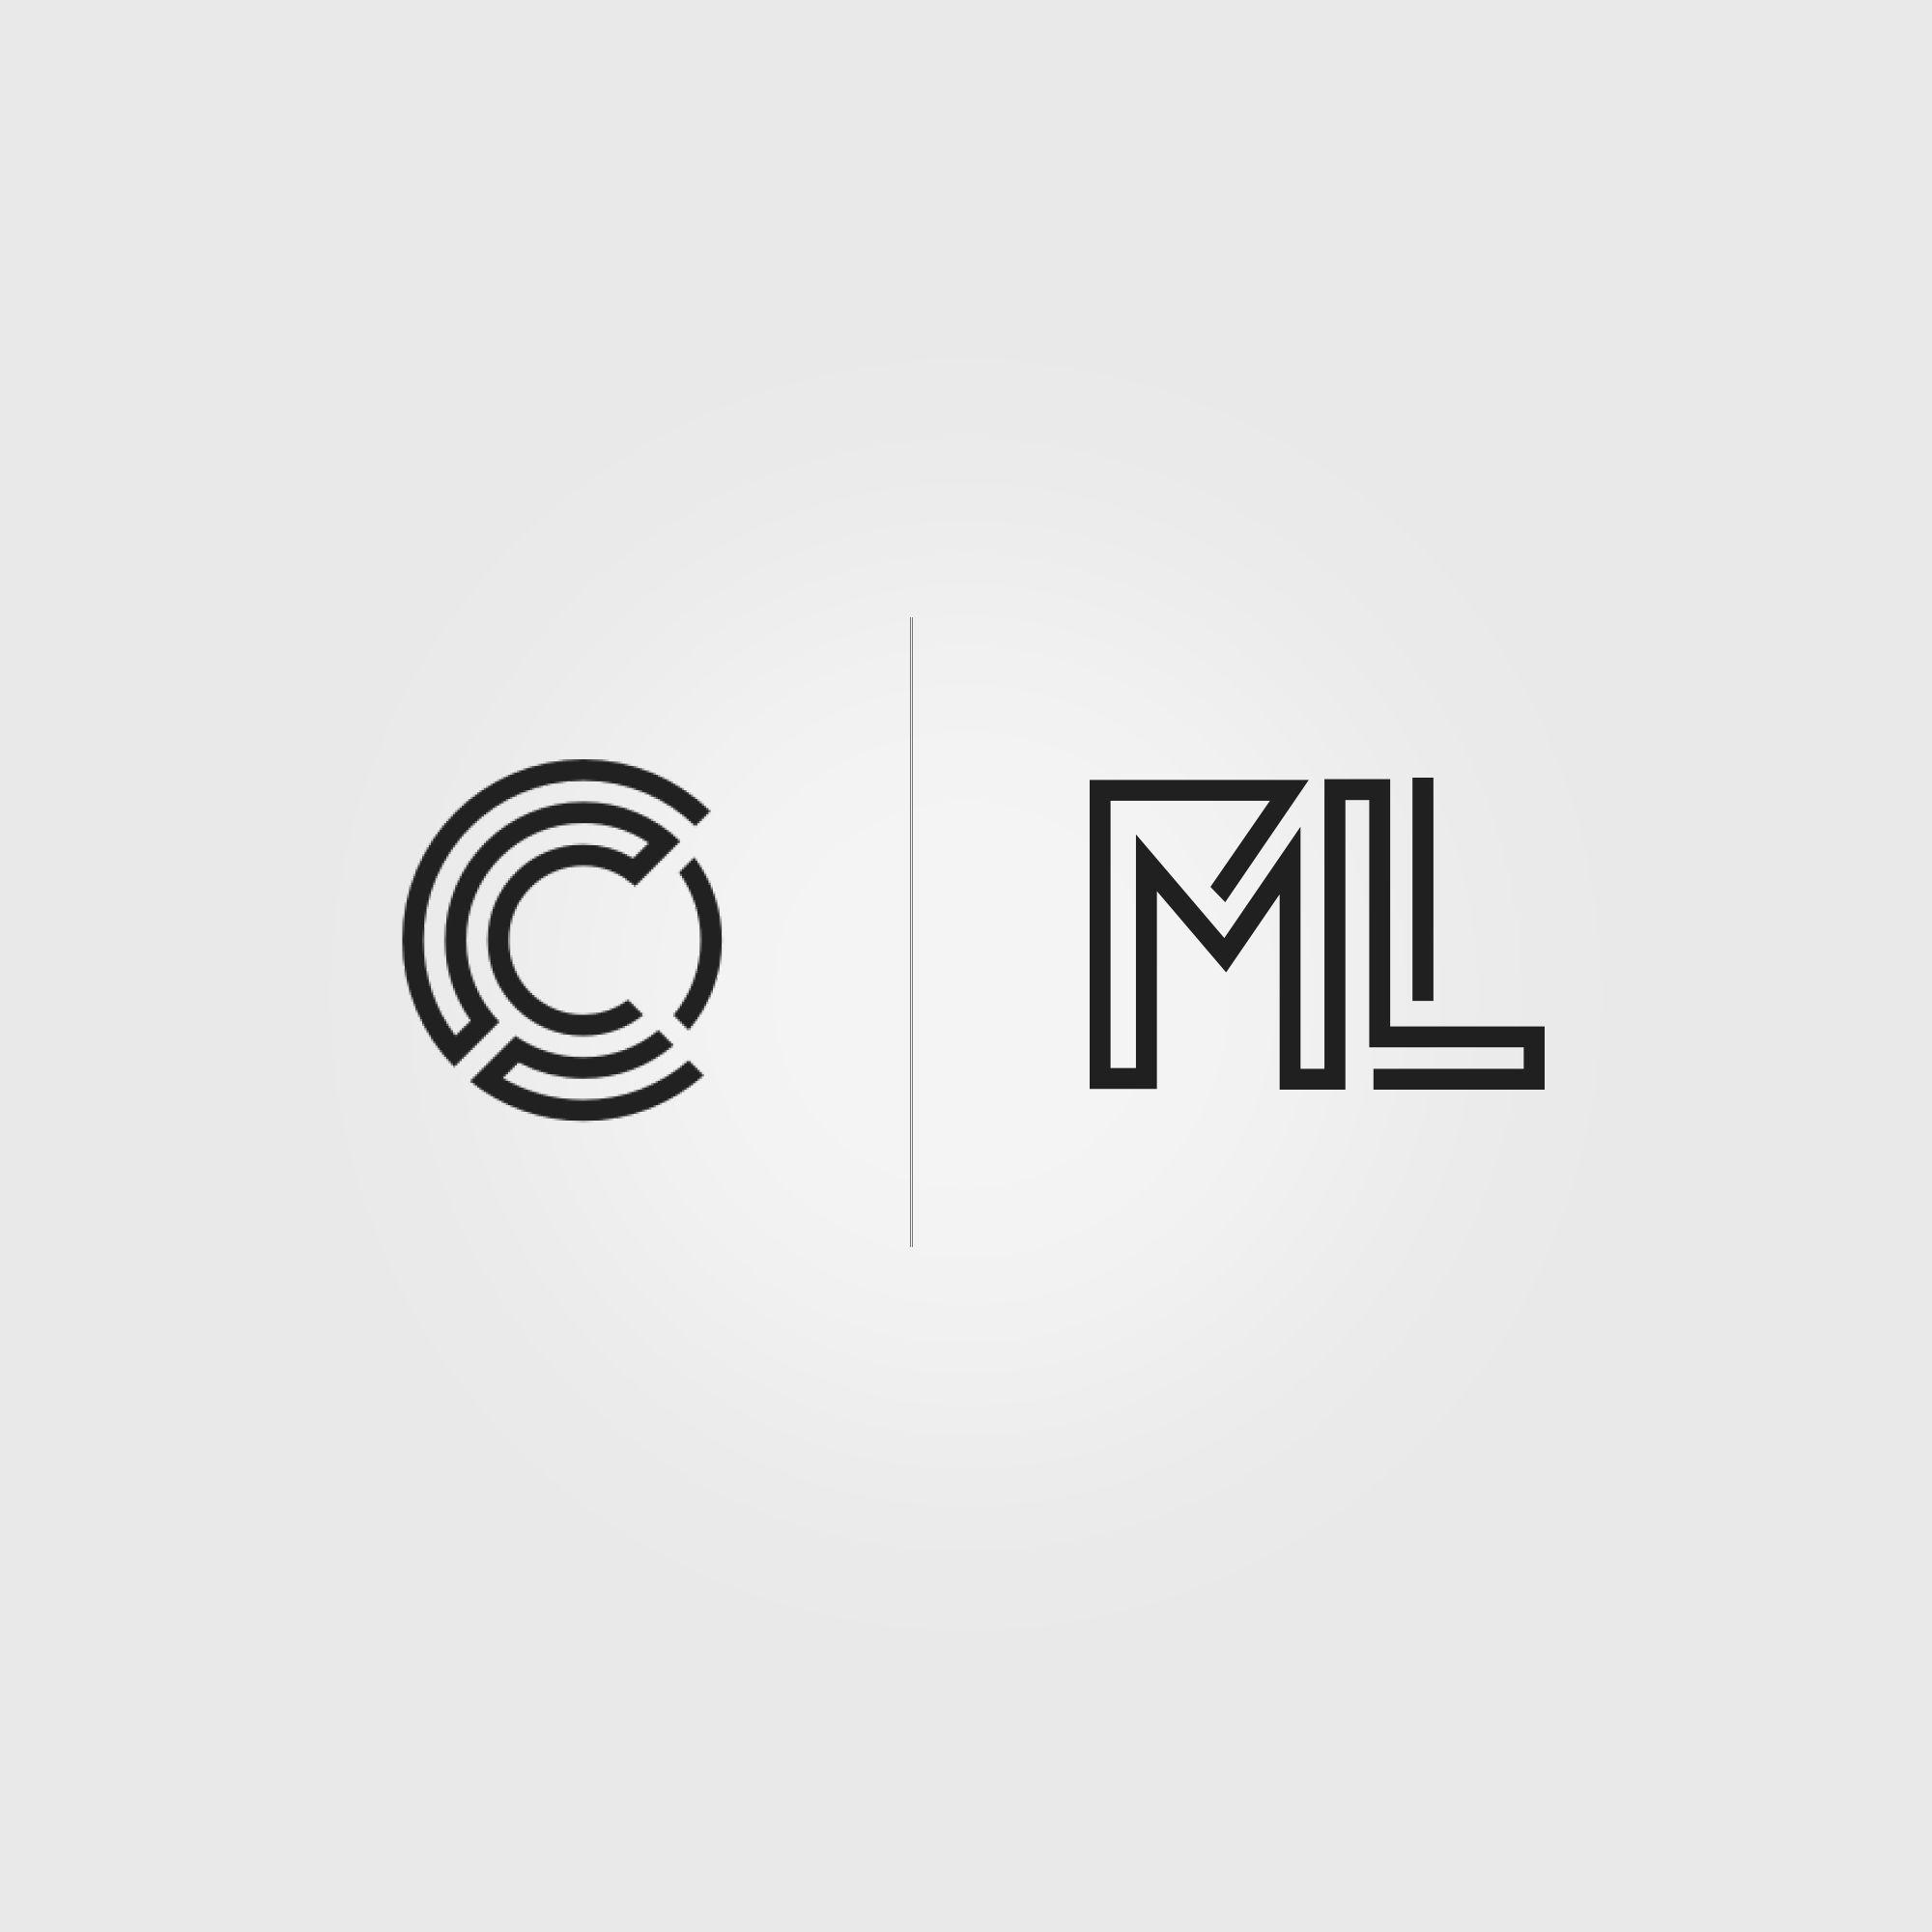 Ml Logo - Something a little different. The client - 